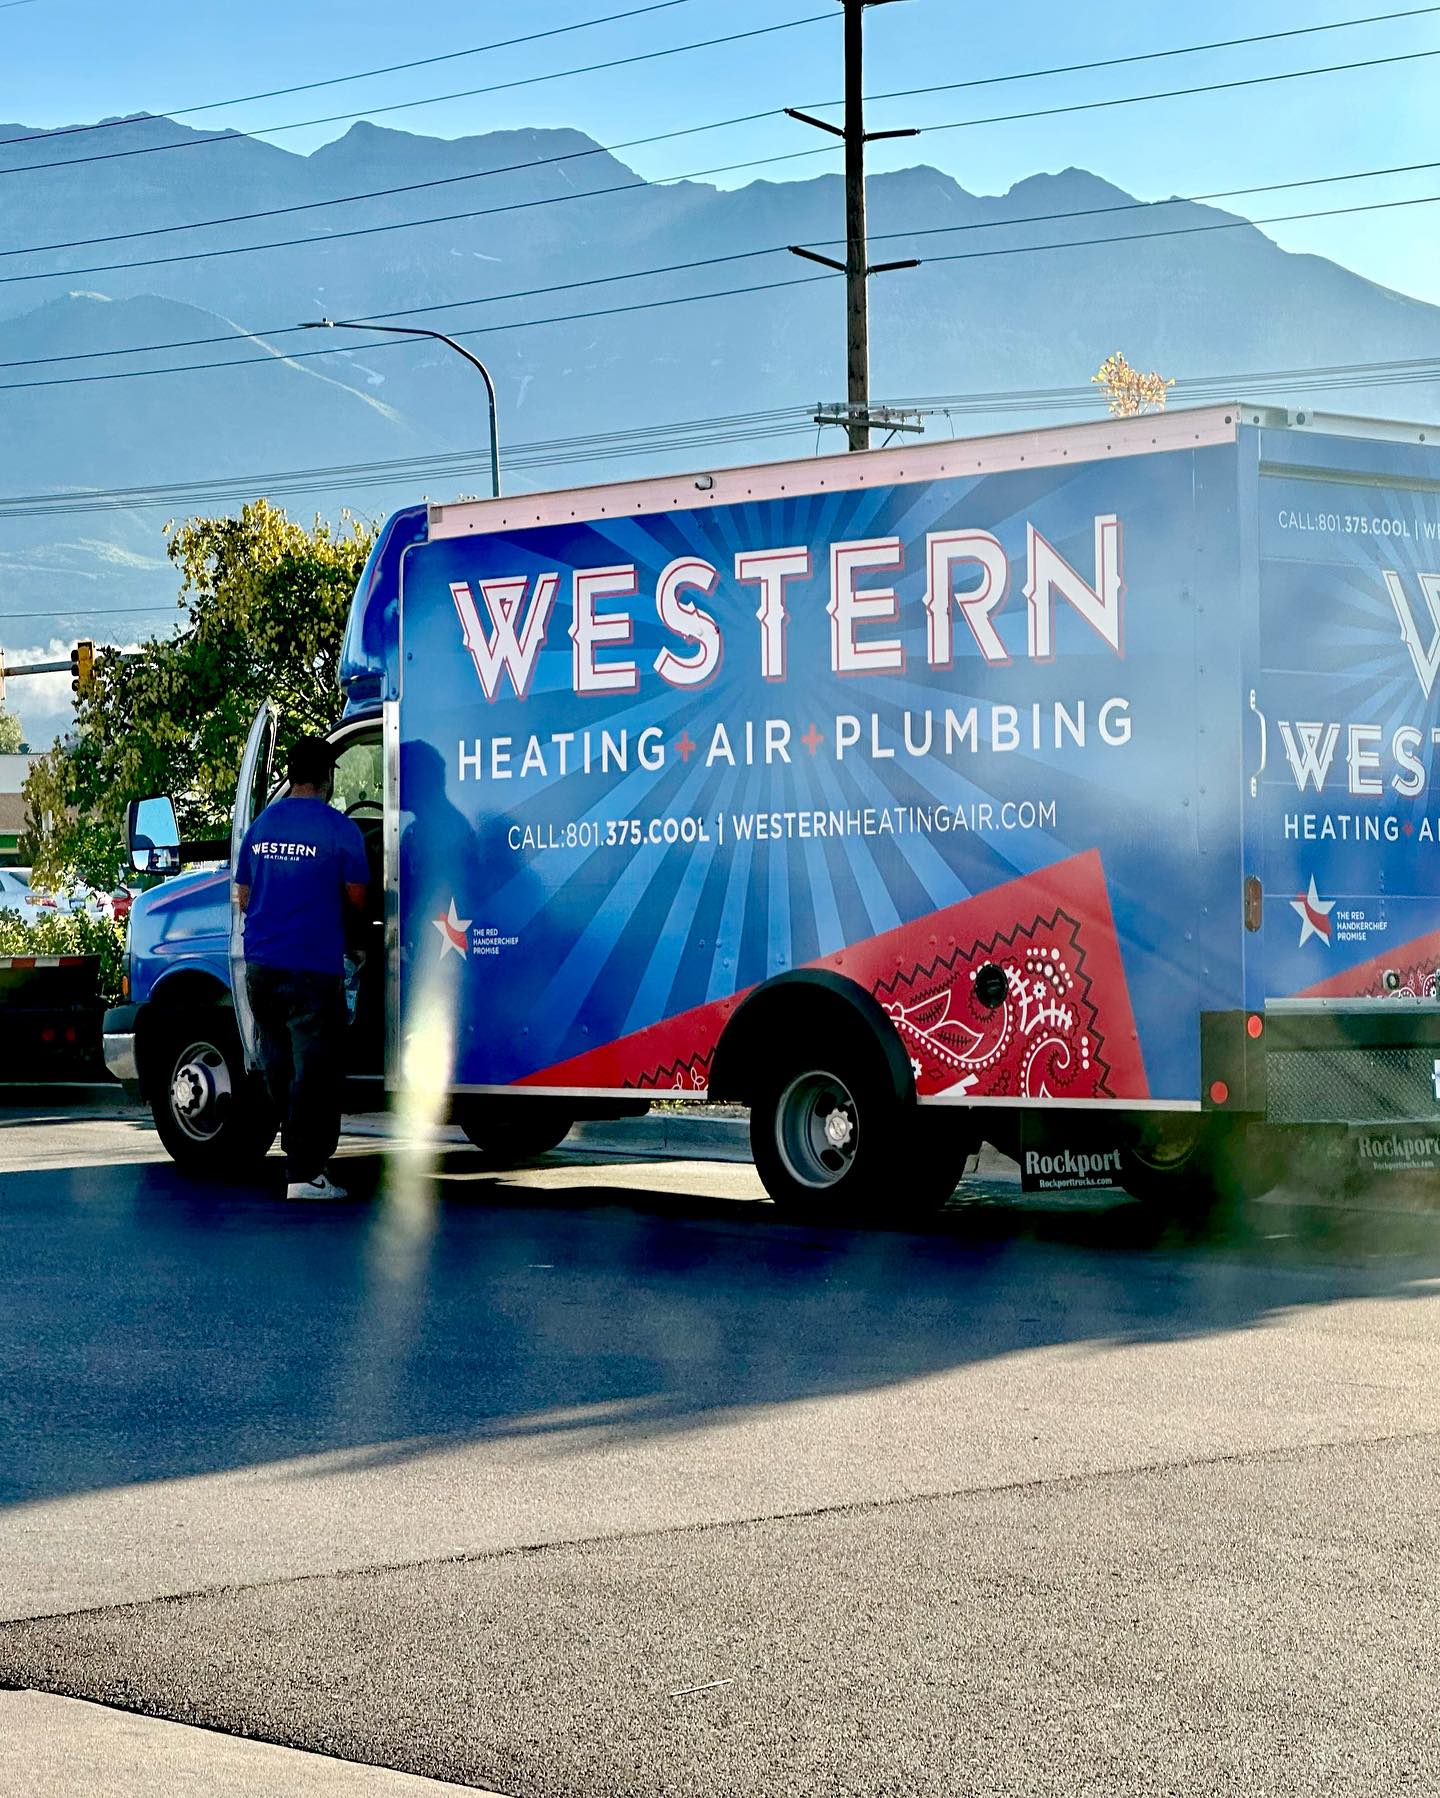 Air Conditioning Installation & Replacement in Orem & Provo, UT - Western Heating and Air